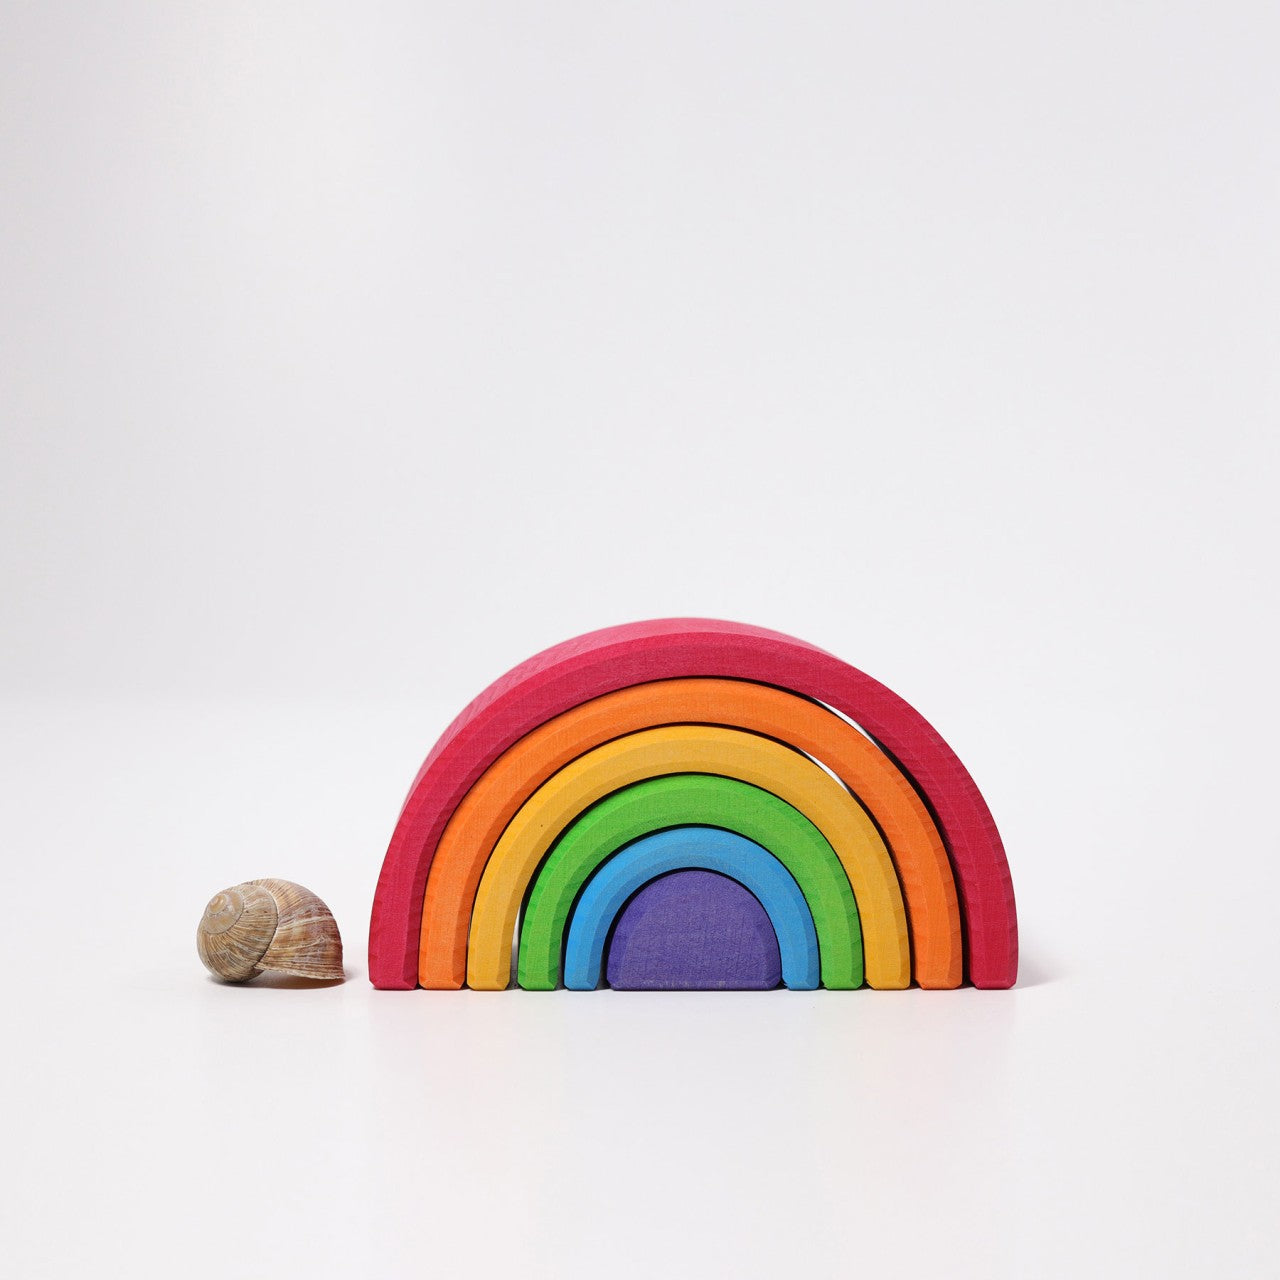 Rainbow | 6 Pieces | Wooden Toys for Kids | Open-Ended Play